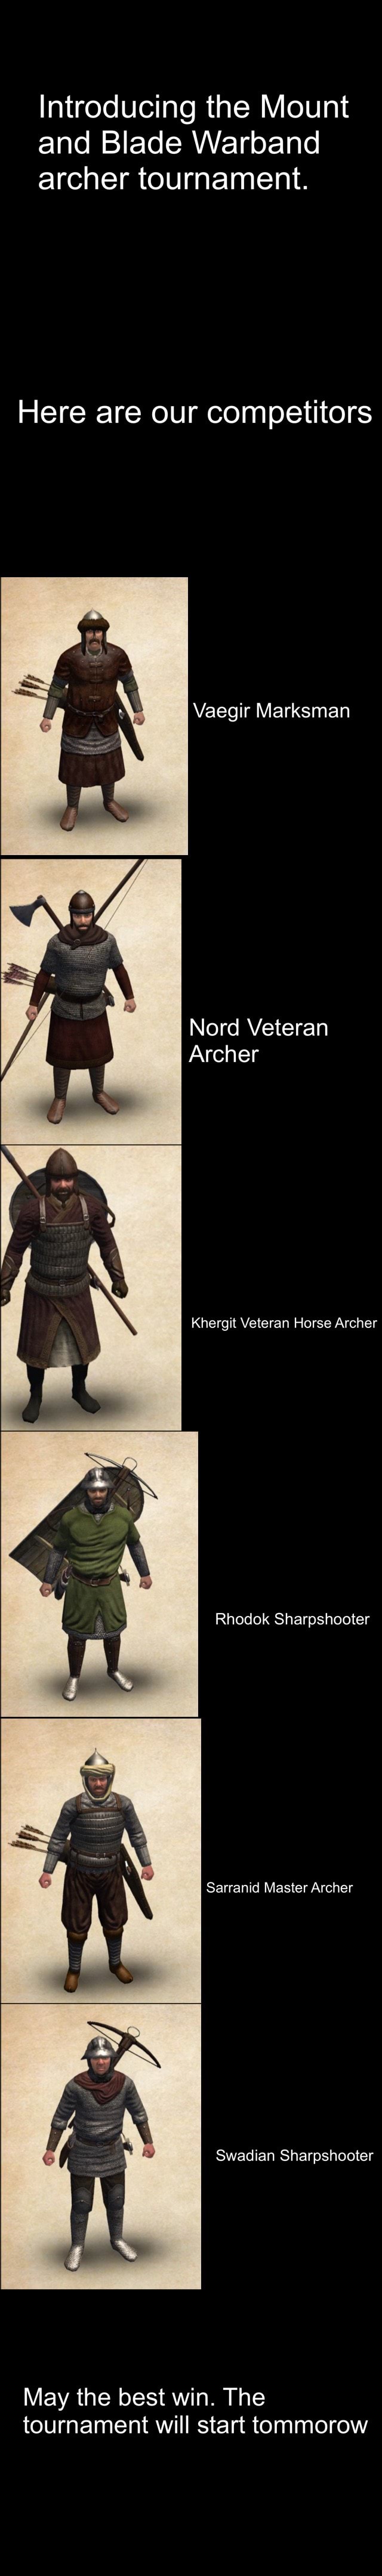 mount and blade warband best archers